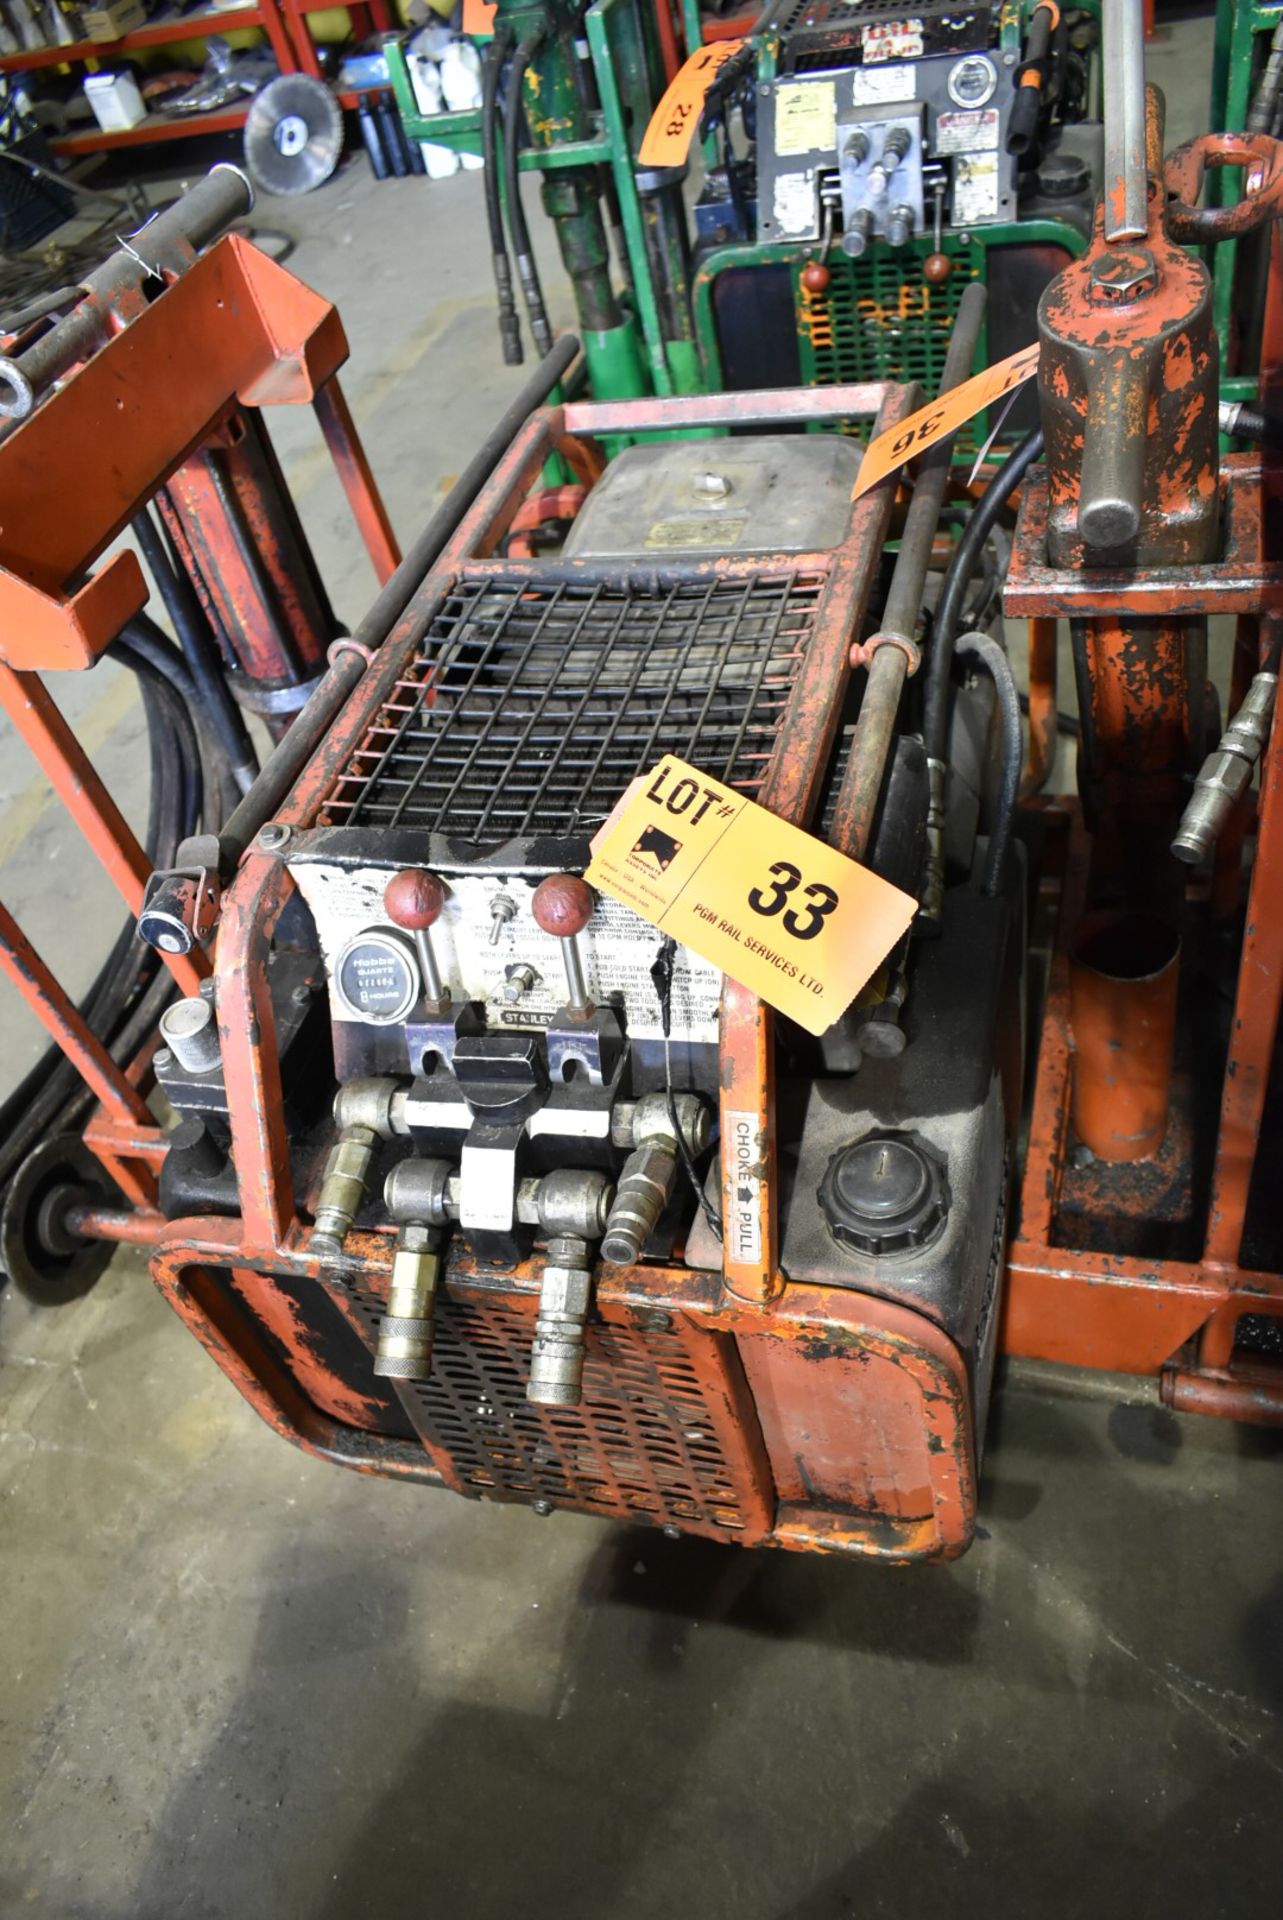 MFG N/A RAIL CART MOUNTED PORTABLE HYDRAULIC POWER PACK WITH VANGUARD 20HP GAS ENGINE S/N: N/A - Image 3 of 4